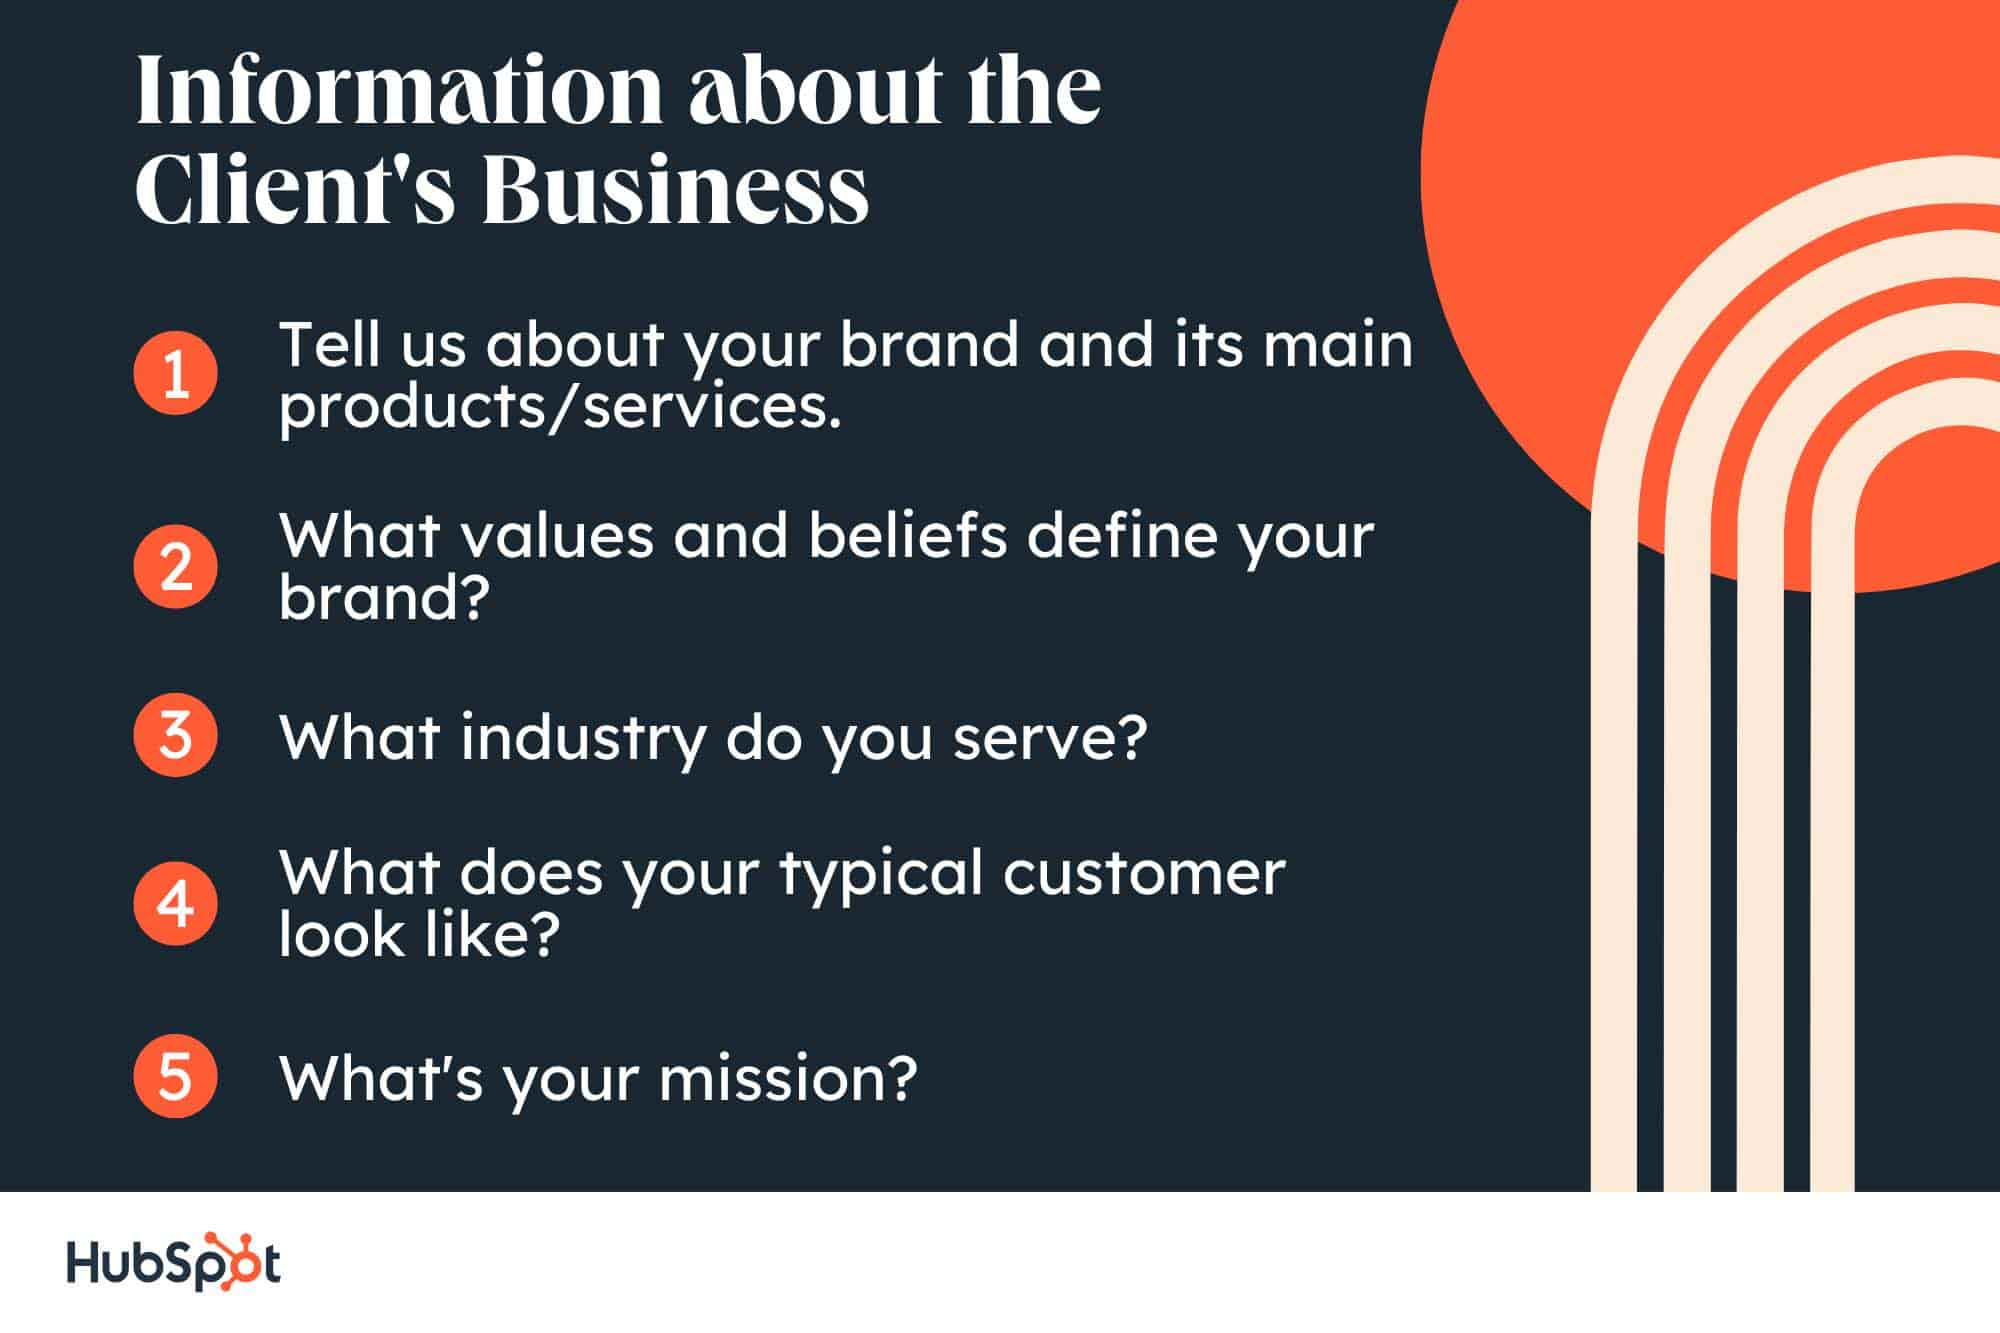 client intake form; Information about the Client's Business, Tell us about your brand and its main products/services. What values and beliefs define your brand? What industry do you serve? What does your typical customer look like? What's your mission?